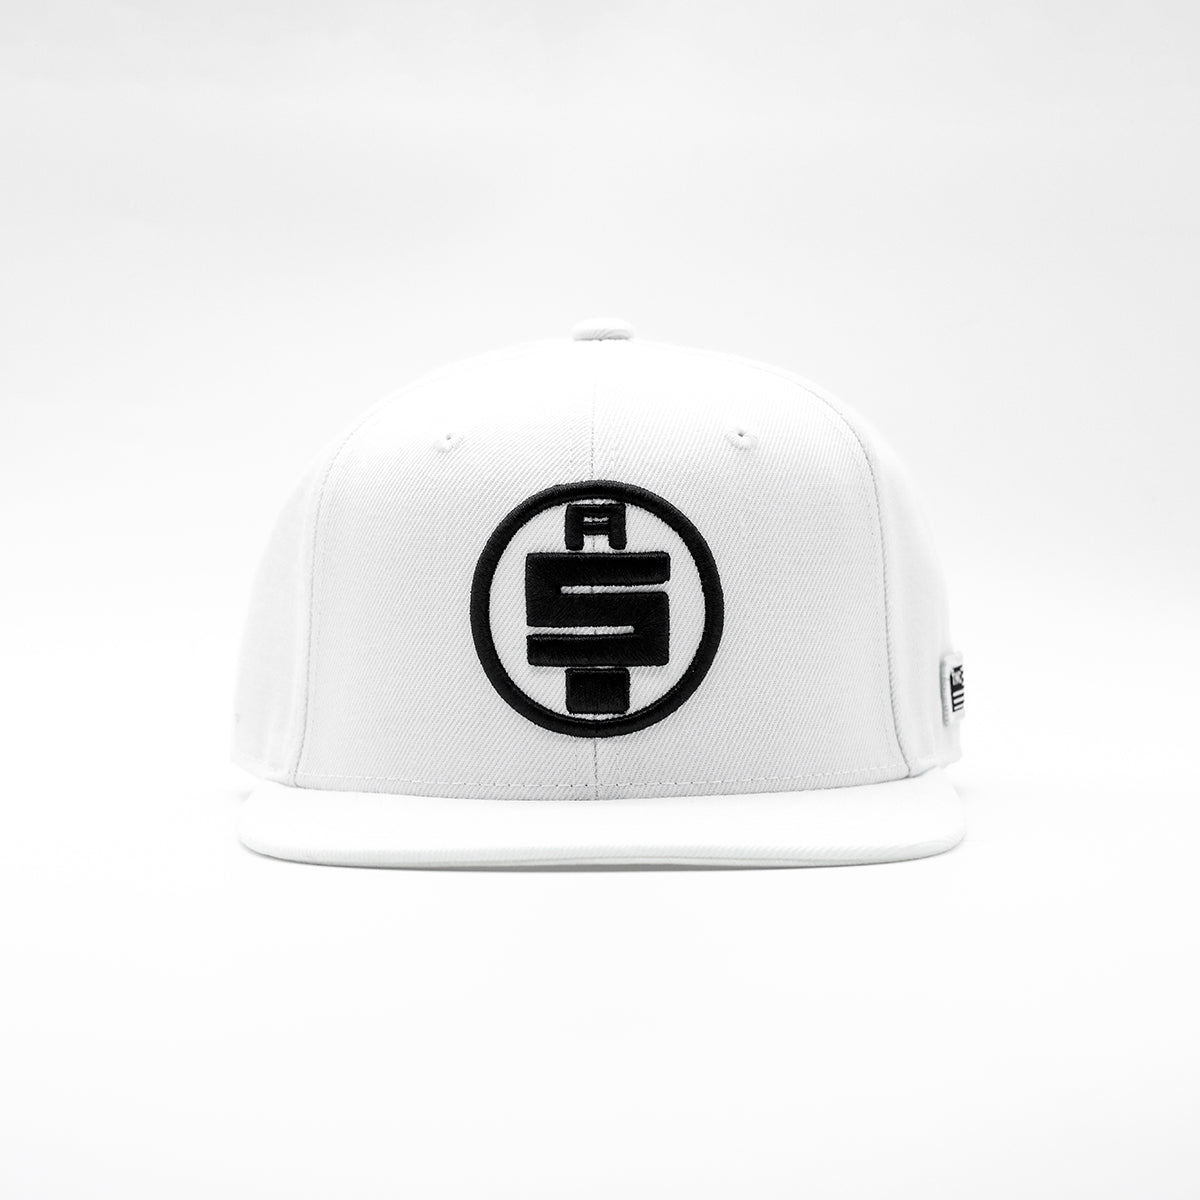 All Money In Limited Edition Snapback - White/Black - Front